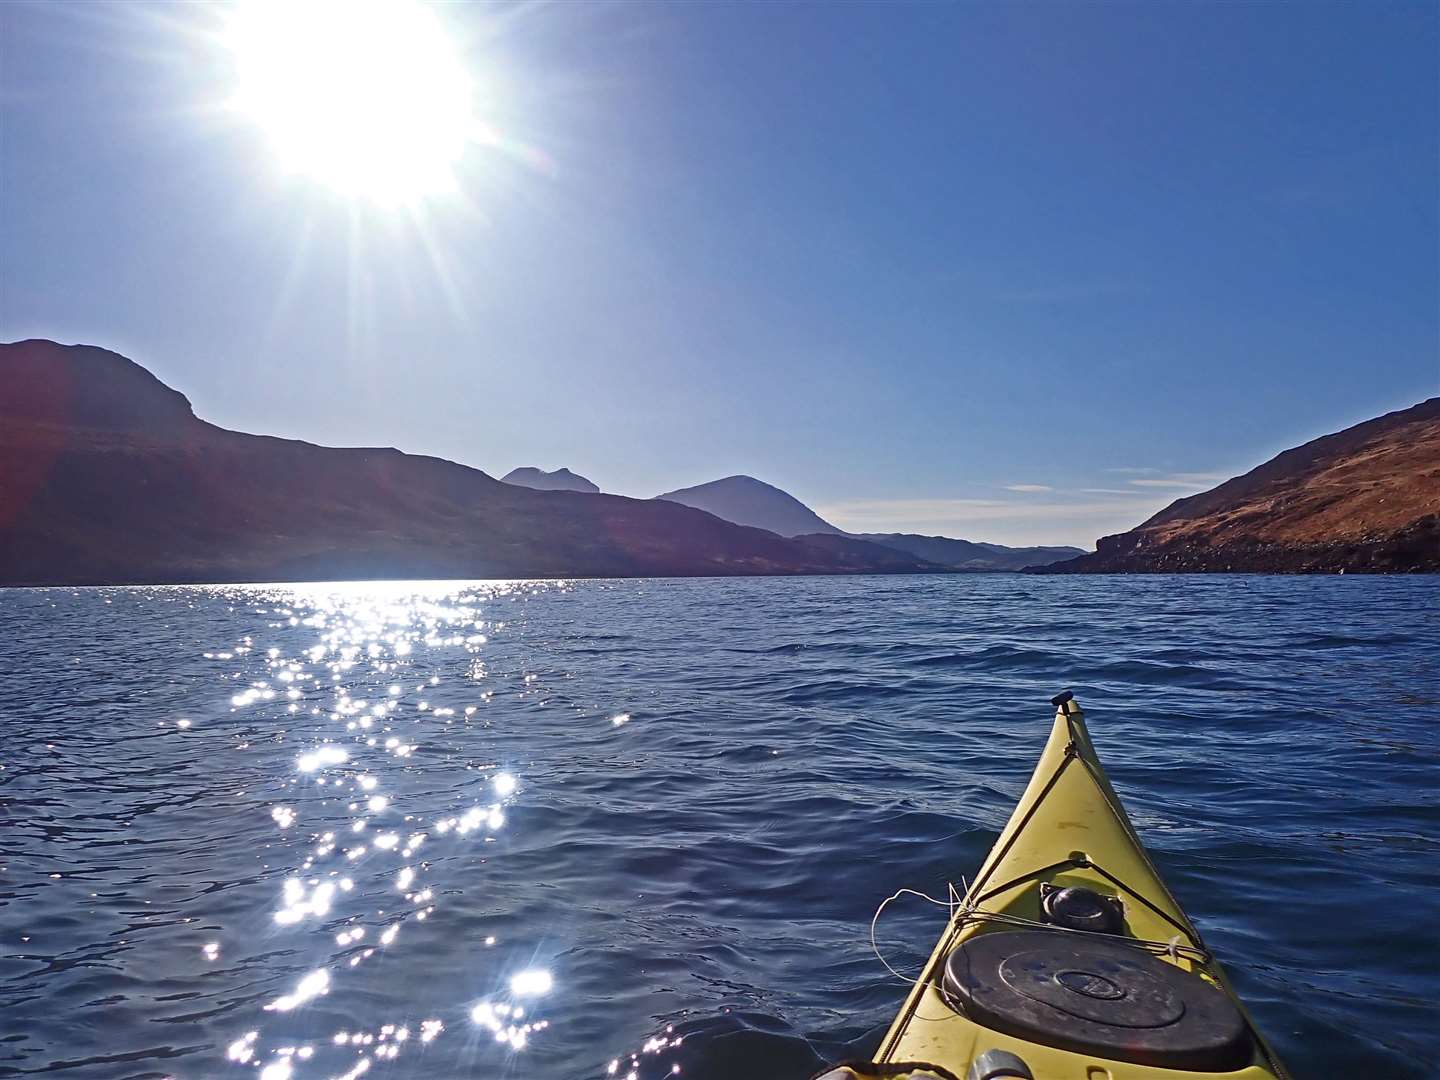 Paddling back to Kylesku in the afternoon sun.